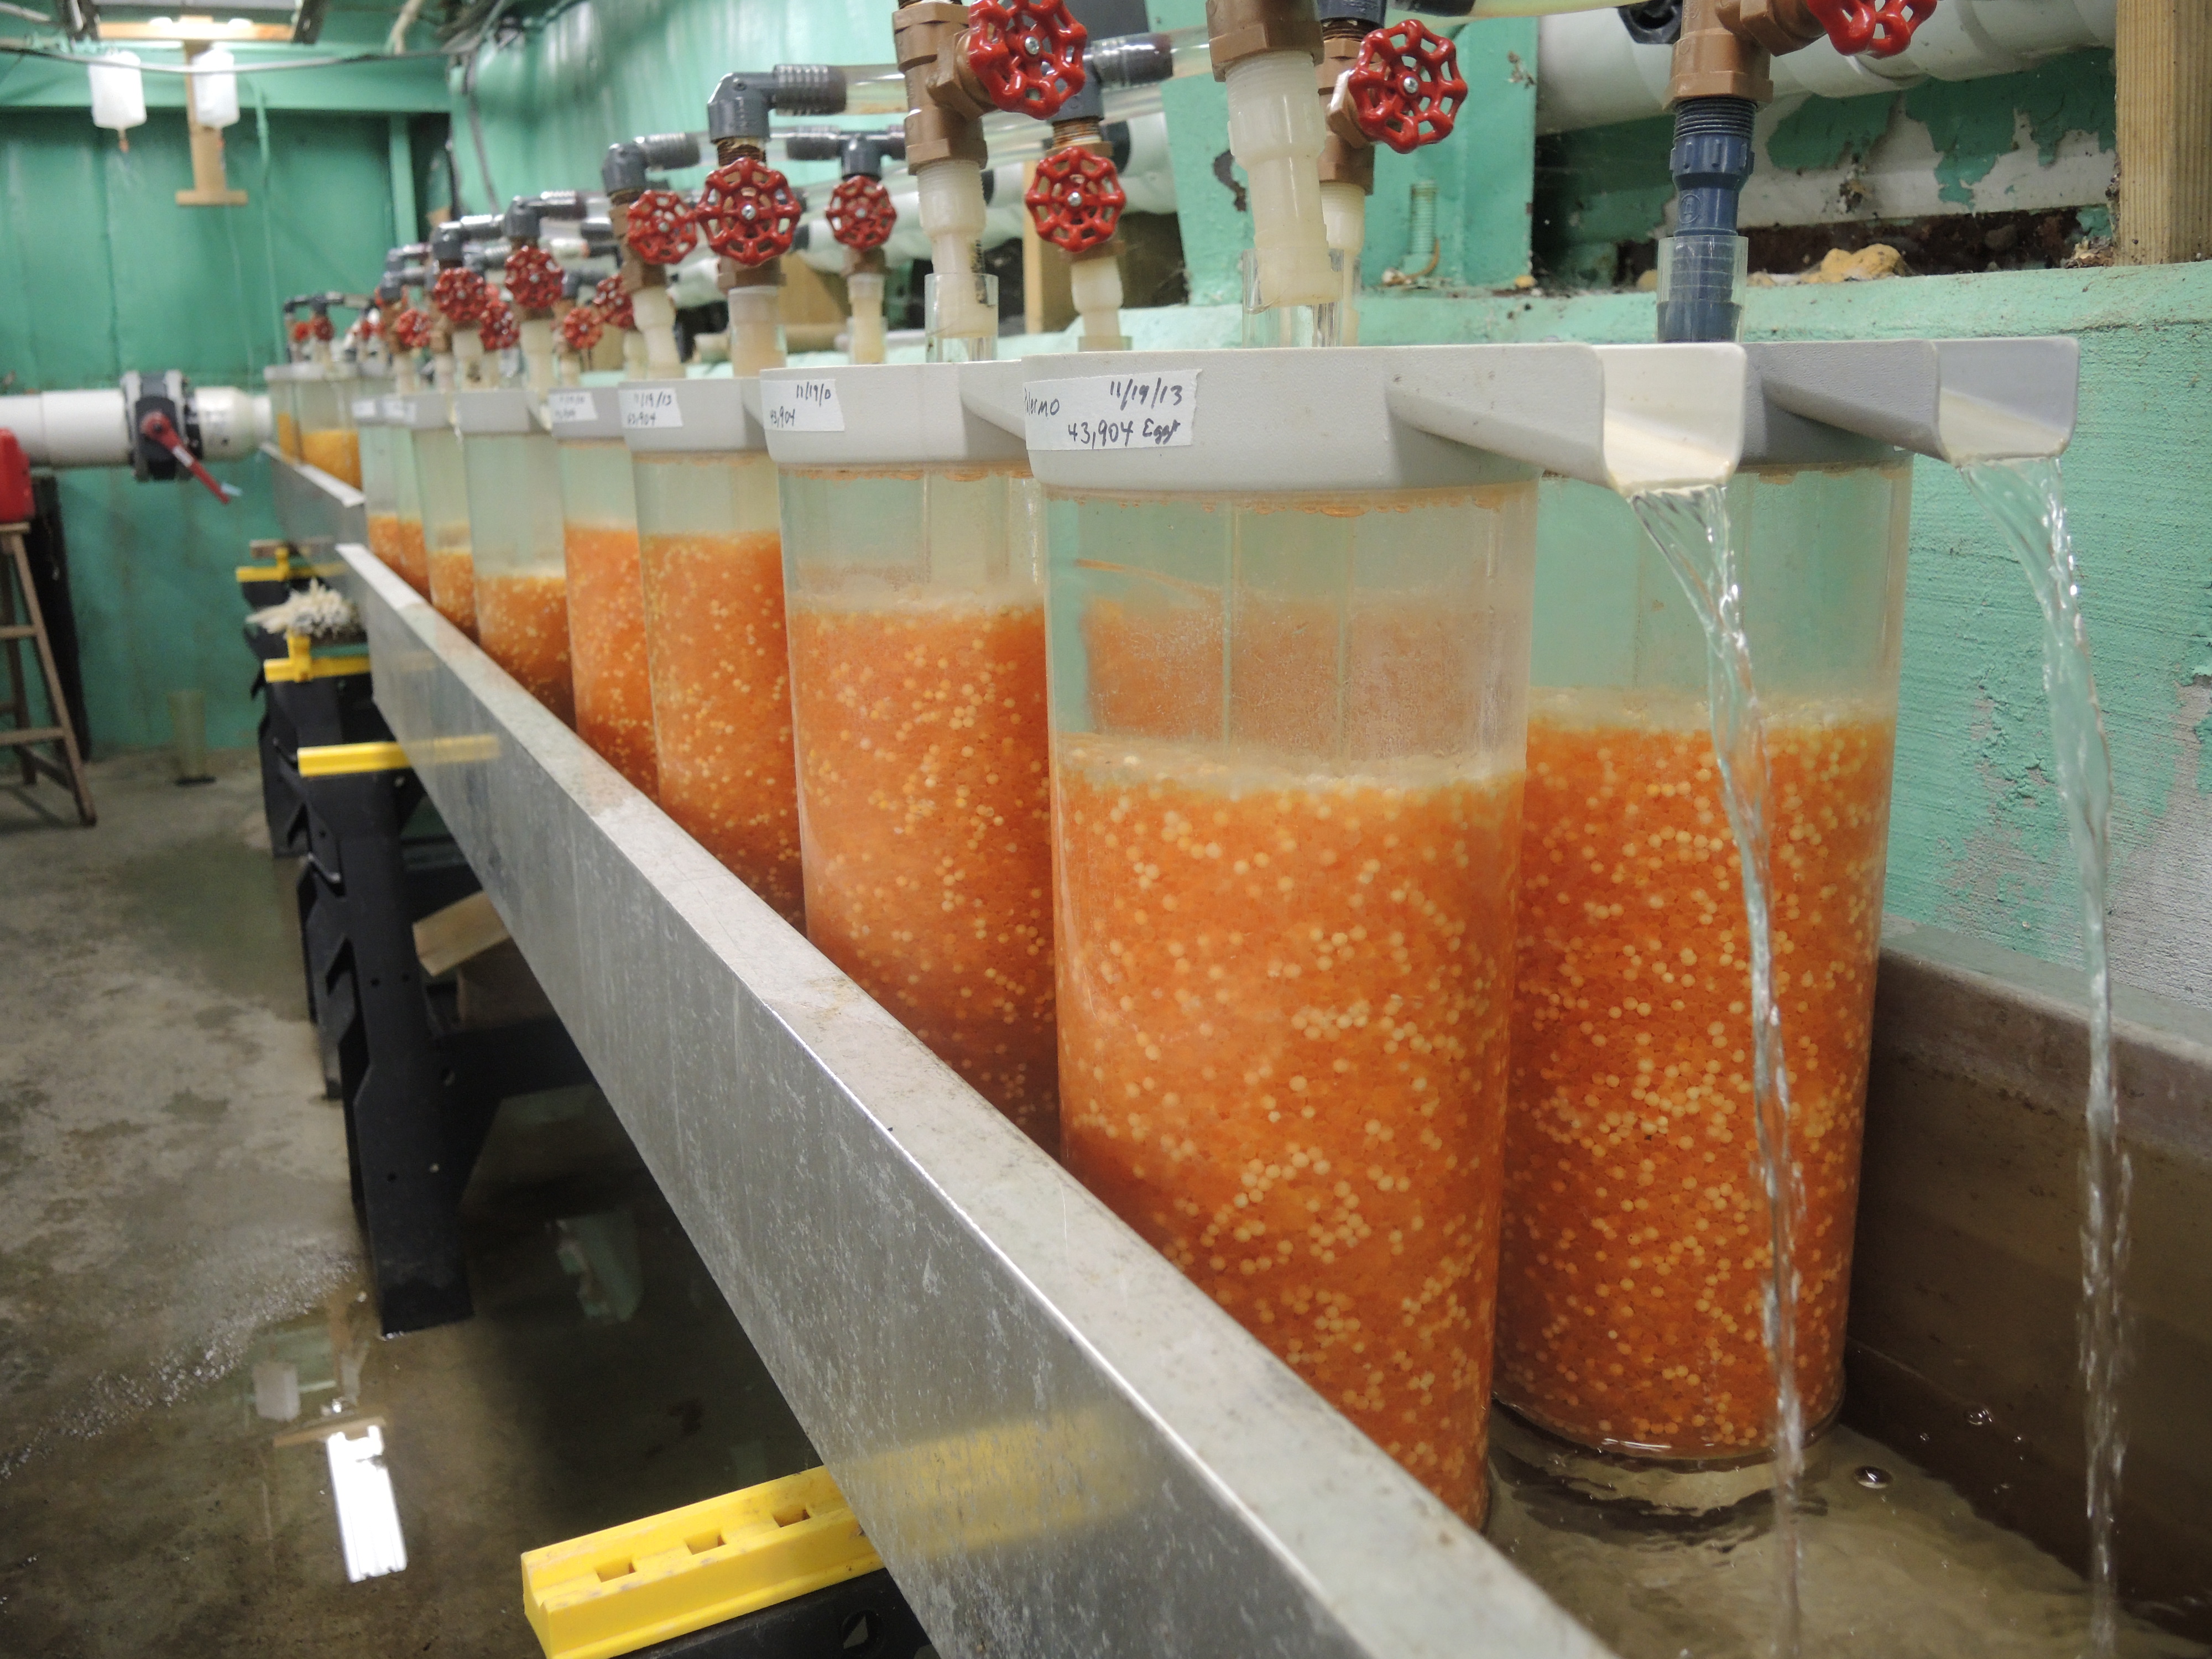 Millions of trout, salmon and togue eggs are stored in these containers until they are near hatching.